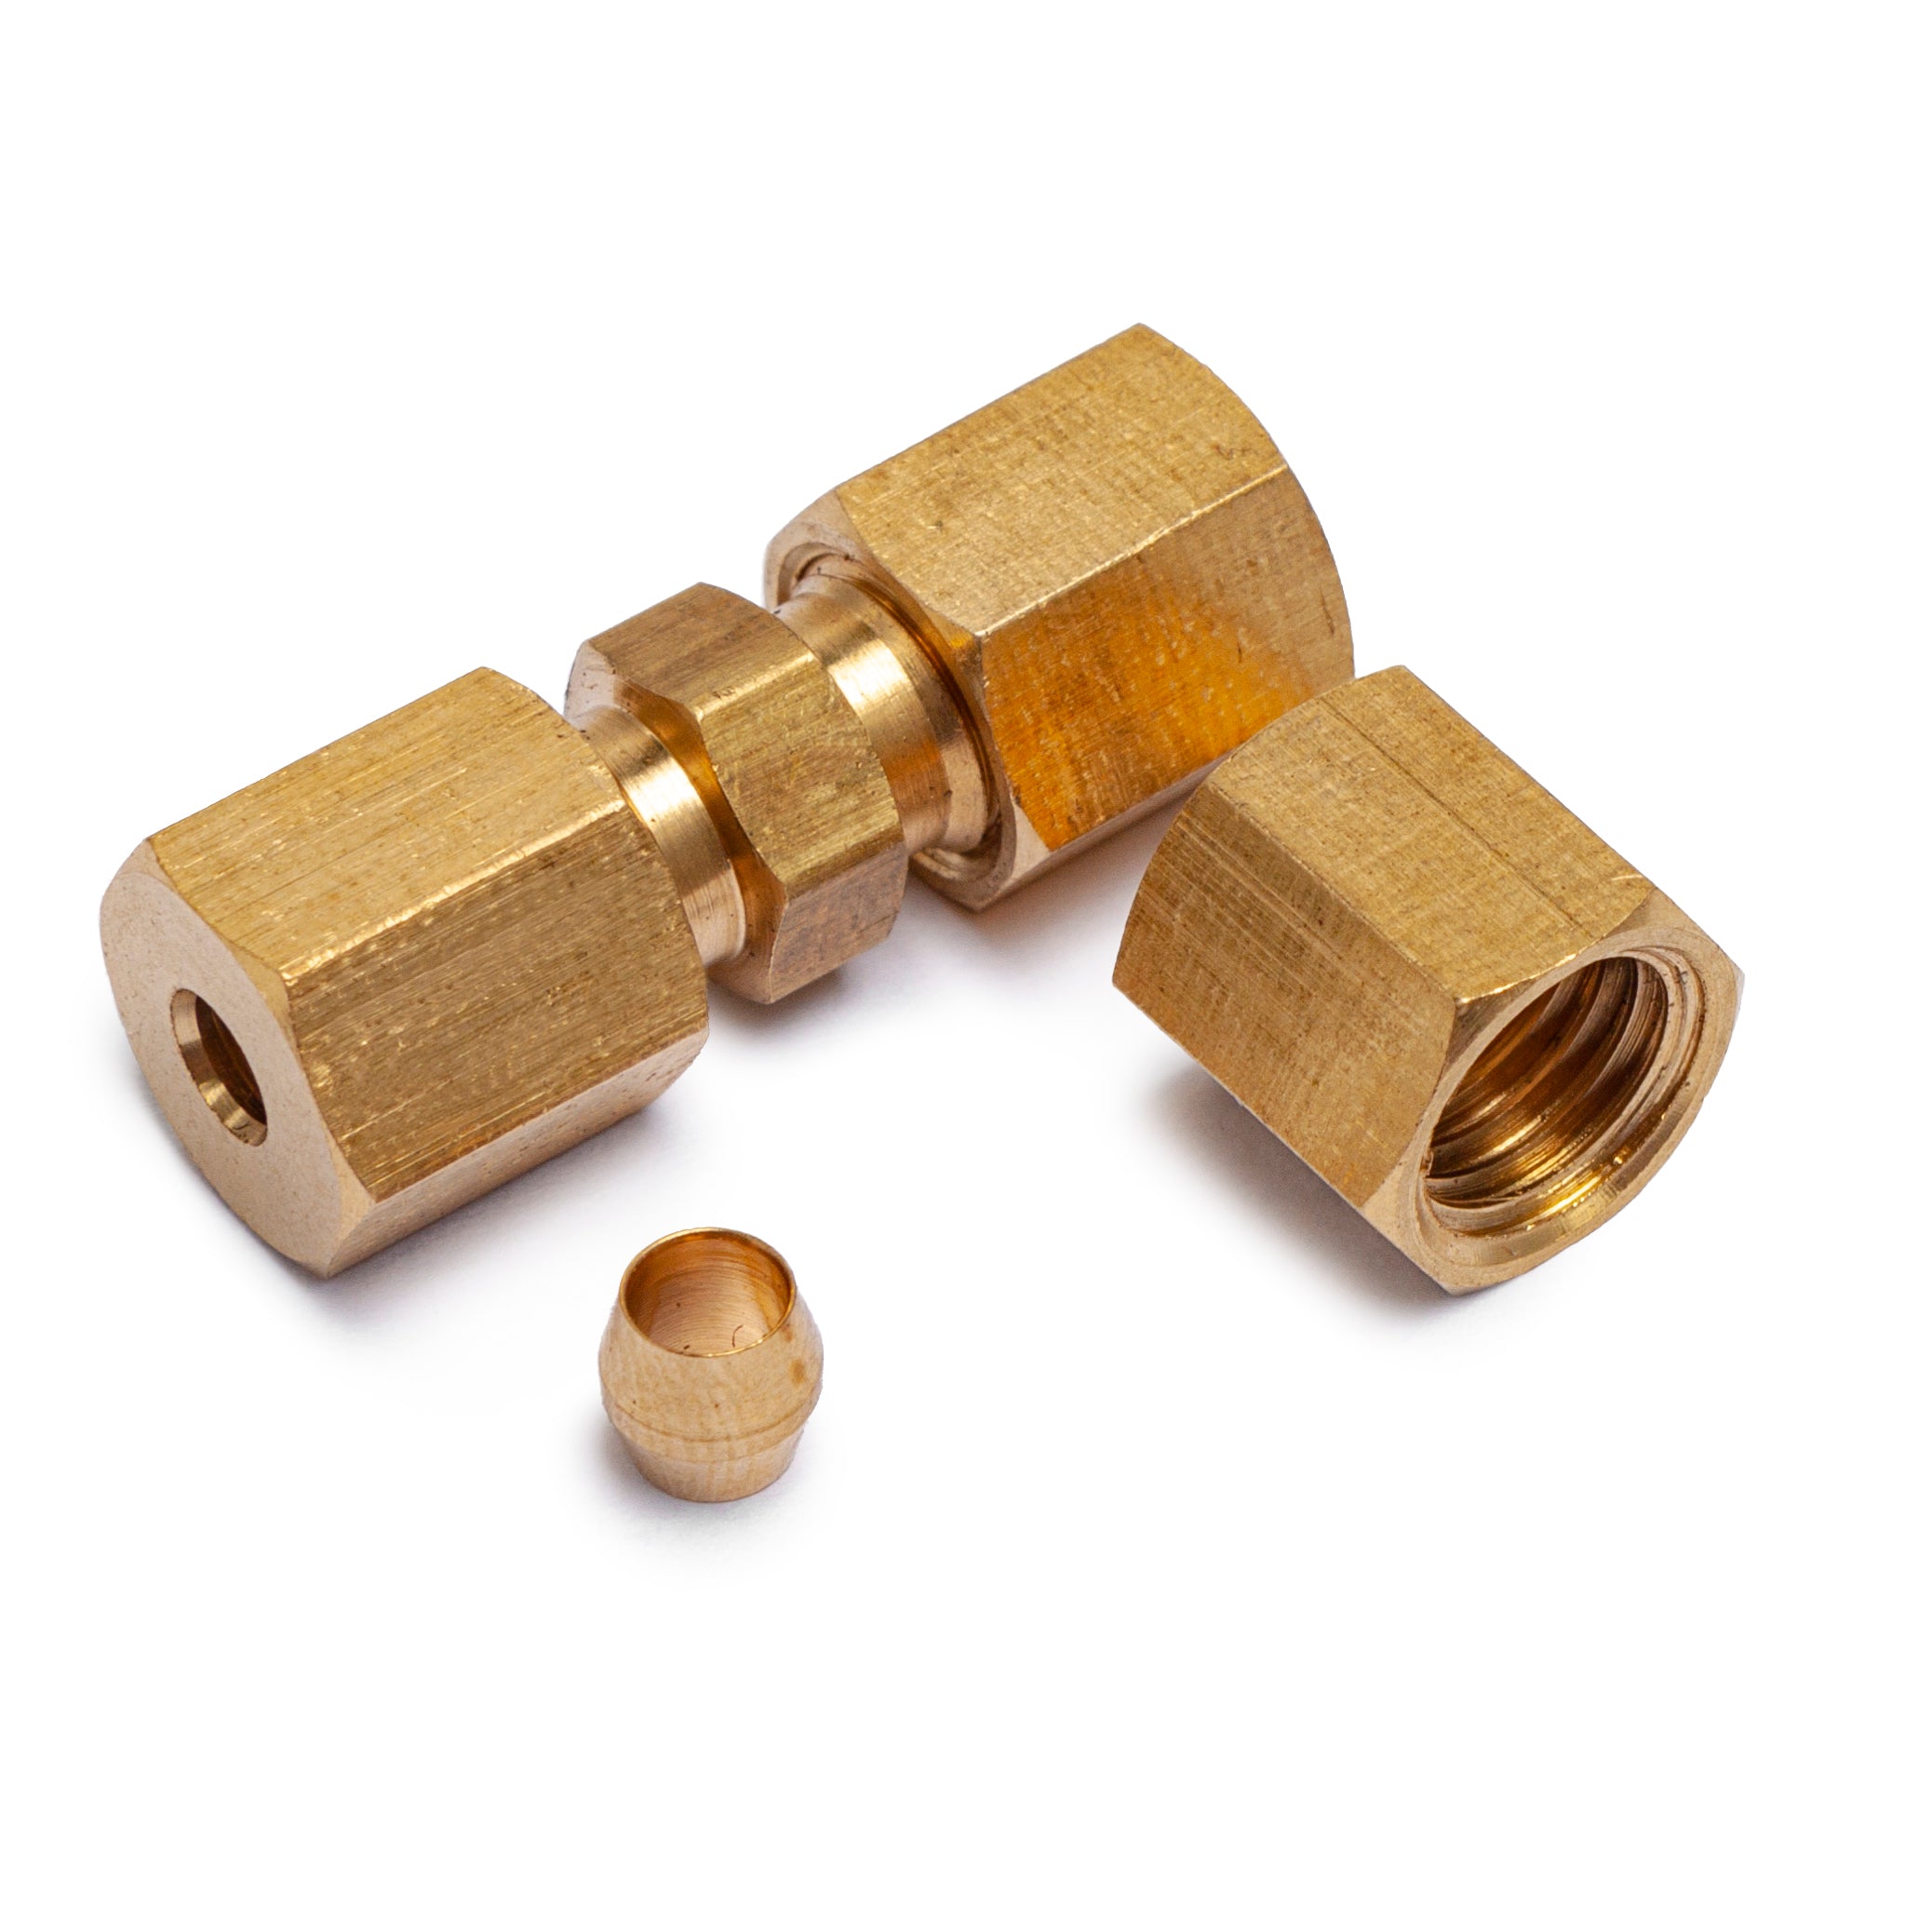 LTWFITTING 3/8-Inch OD 90 Degree Compression Union Elbow,Brass Compression  Fitting(Pack of 5)